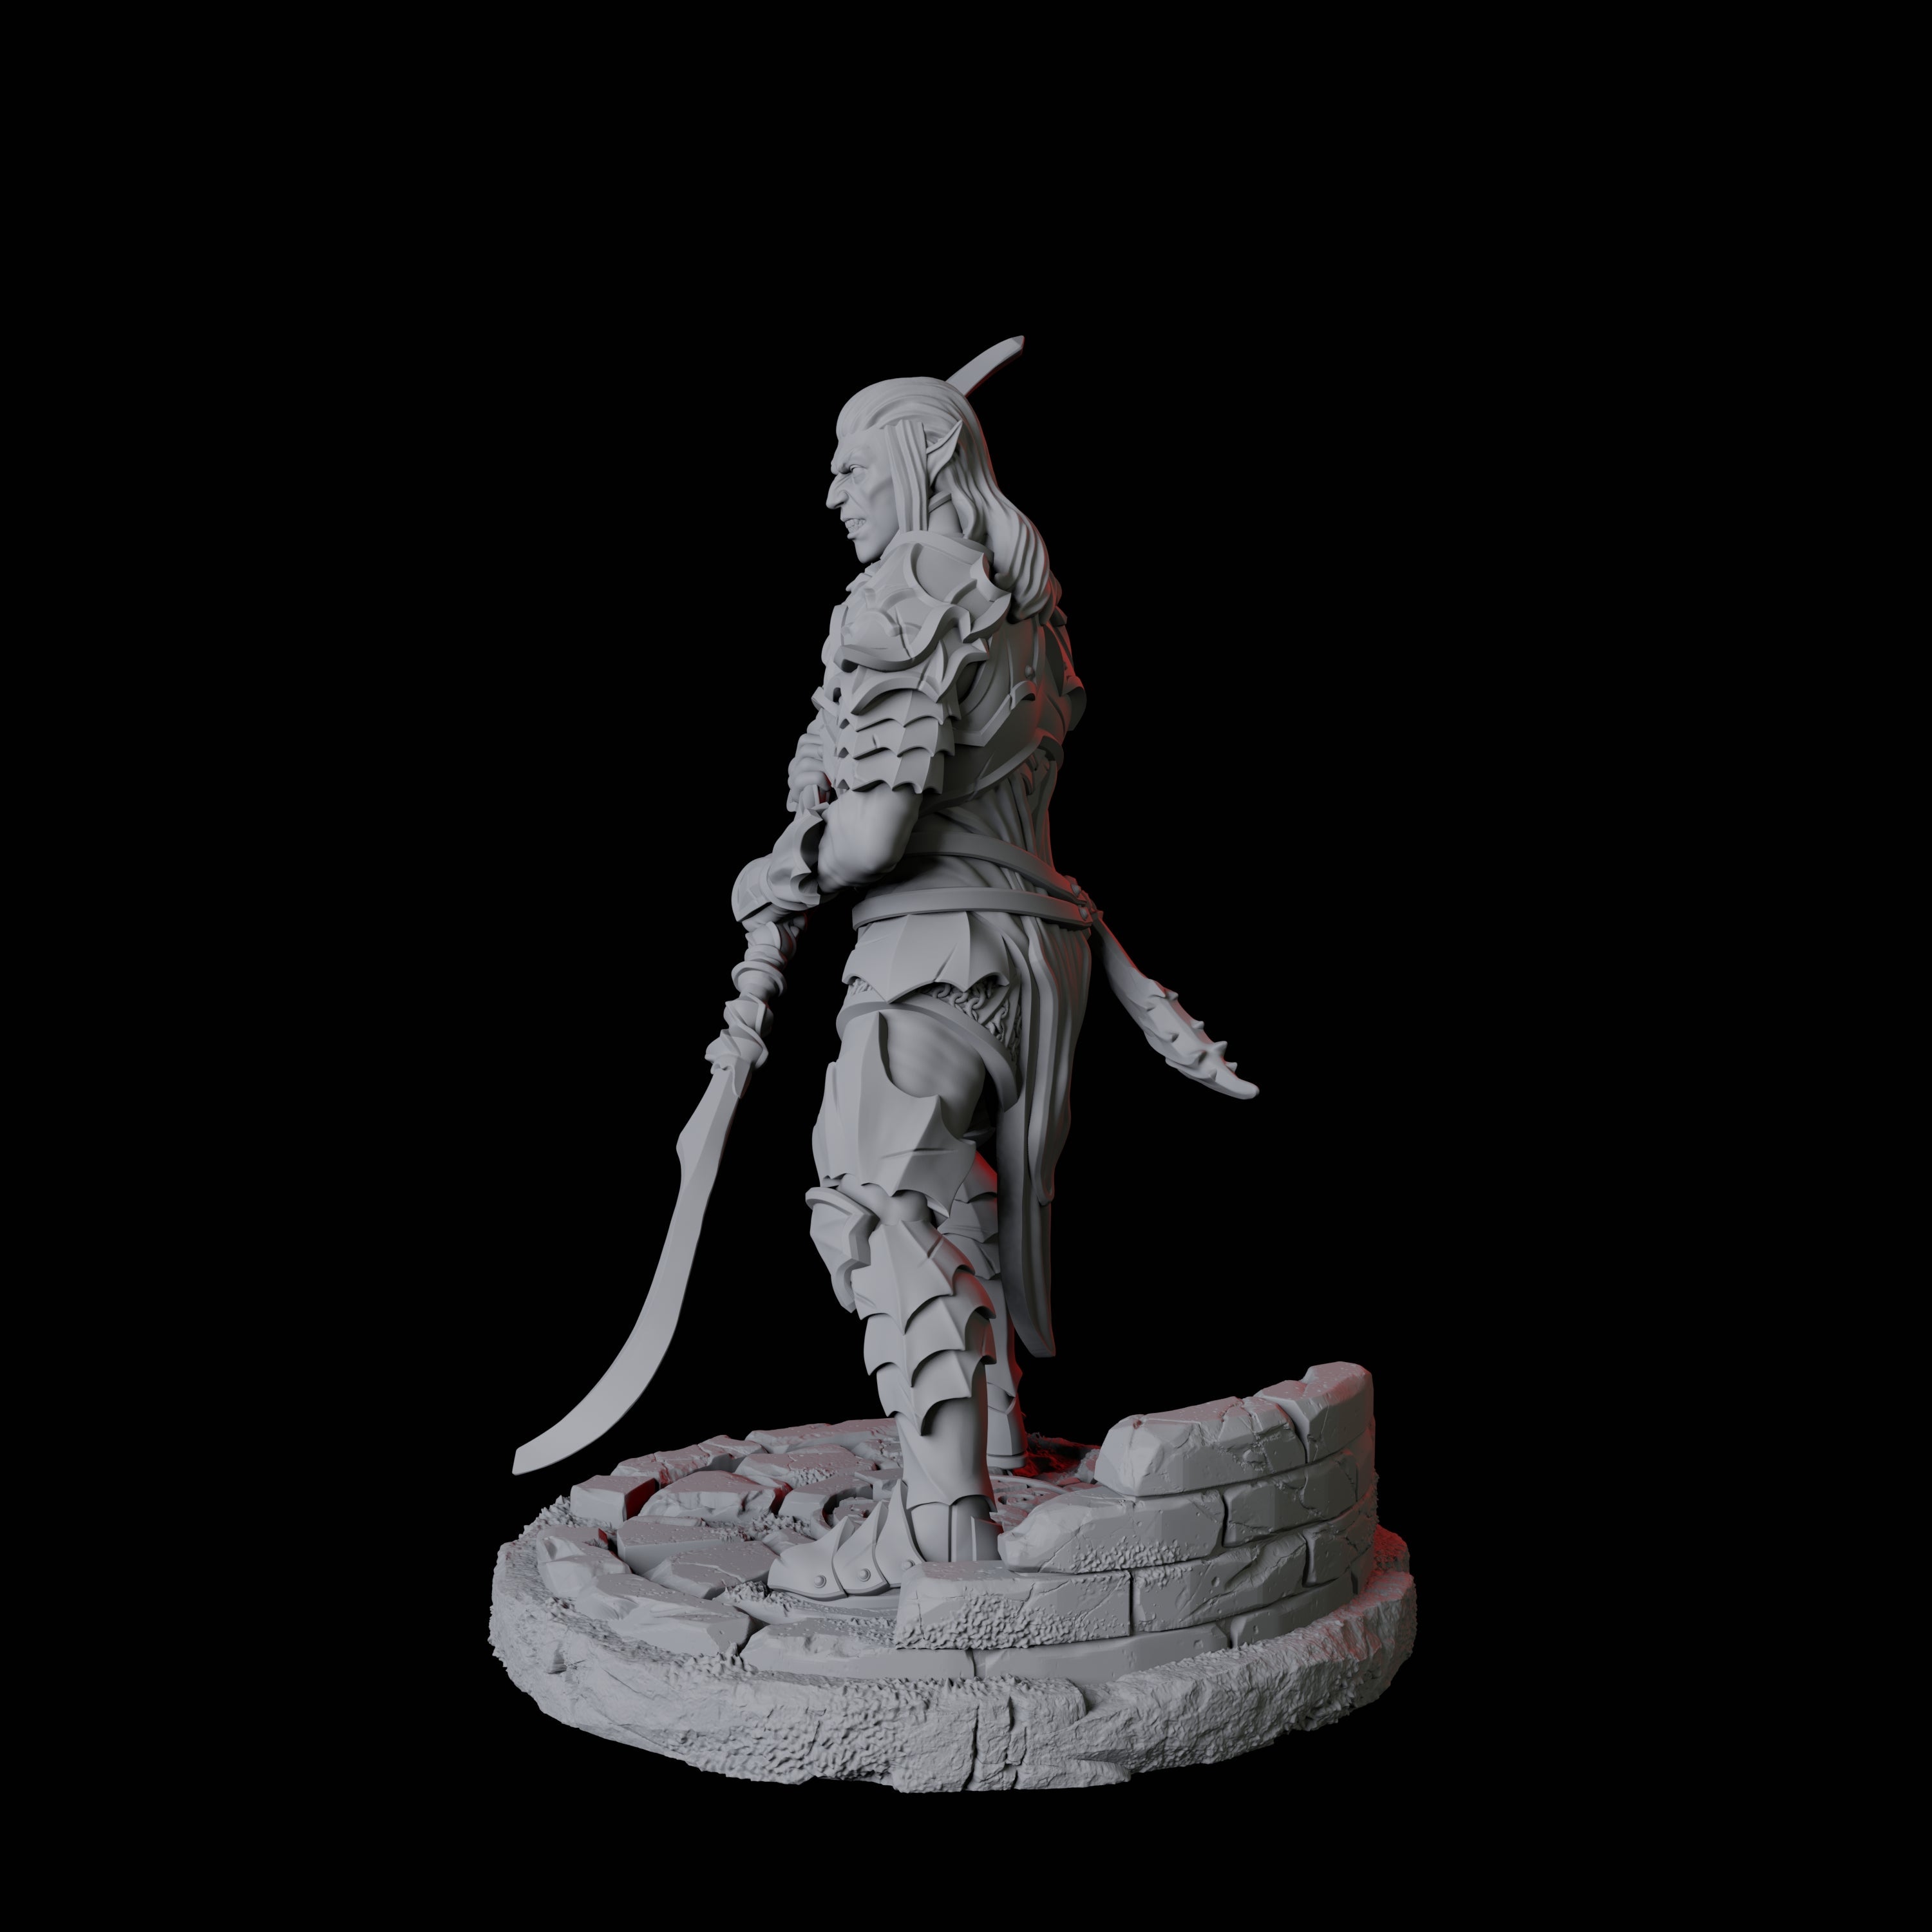 Poised Fighter B Miniature for Dungeons and Dragons, Pathfinder or other TTRPGs